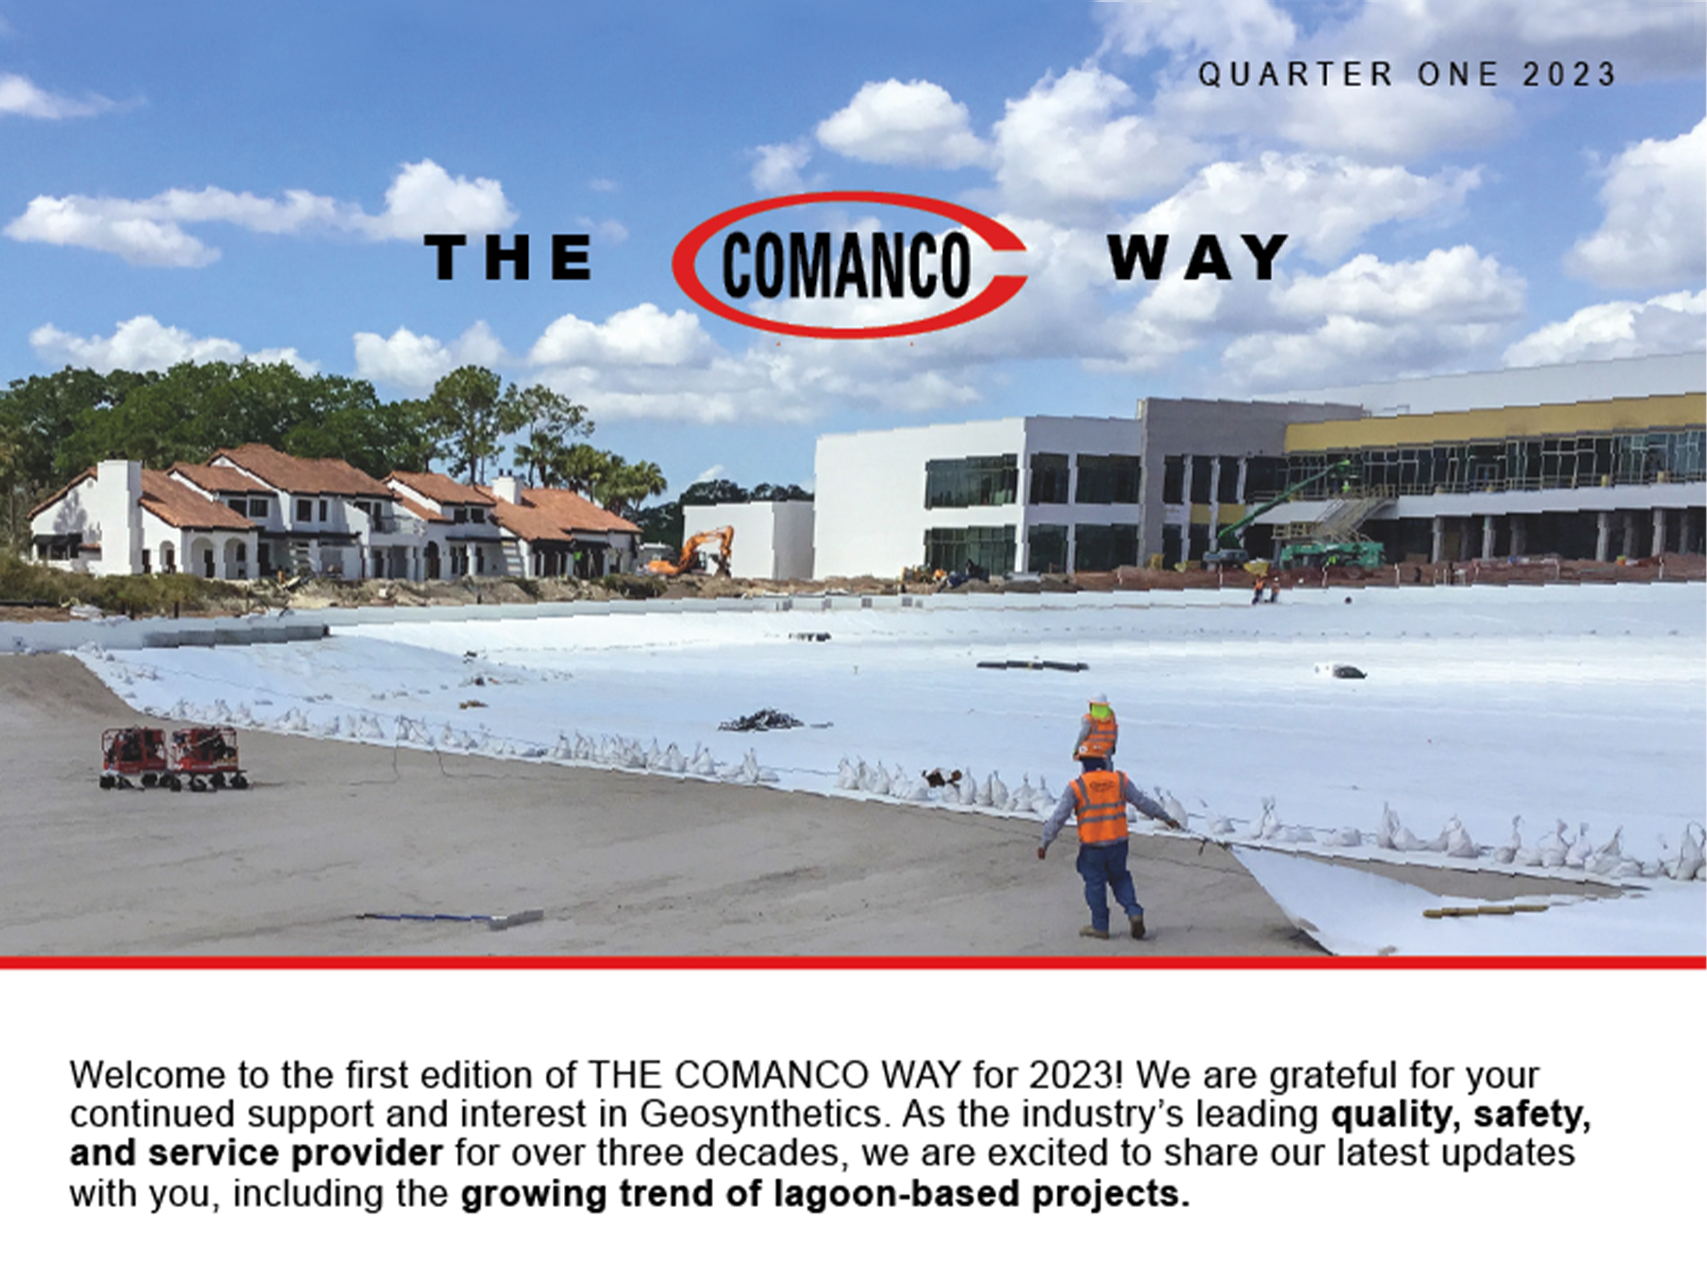 The COMANCO Way's Q1 2023 Edition is here!